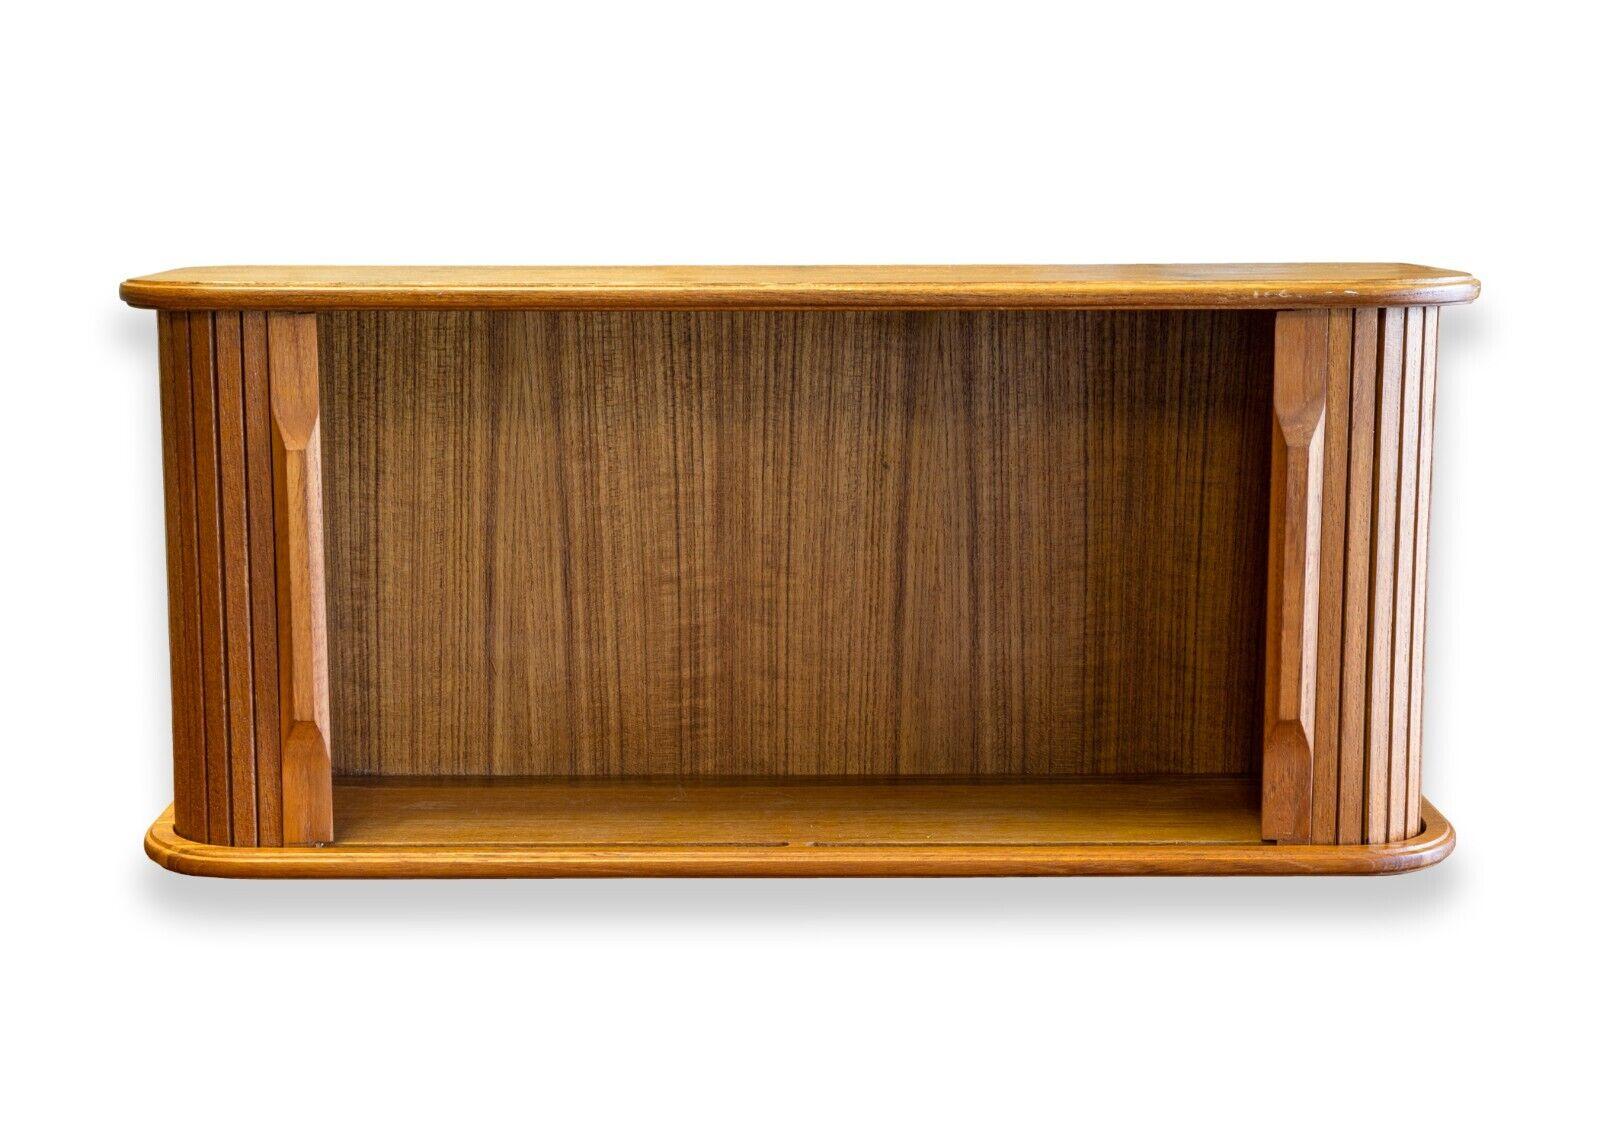 A mid century modern small Danish teak wood tambour door cabinet. A fantastic little storage container, great for any home or office desks. This piece features a full teak wood construction, lovely tambour doors that work flawlessly, and a fully